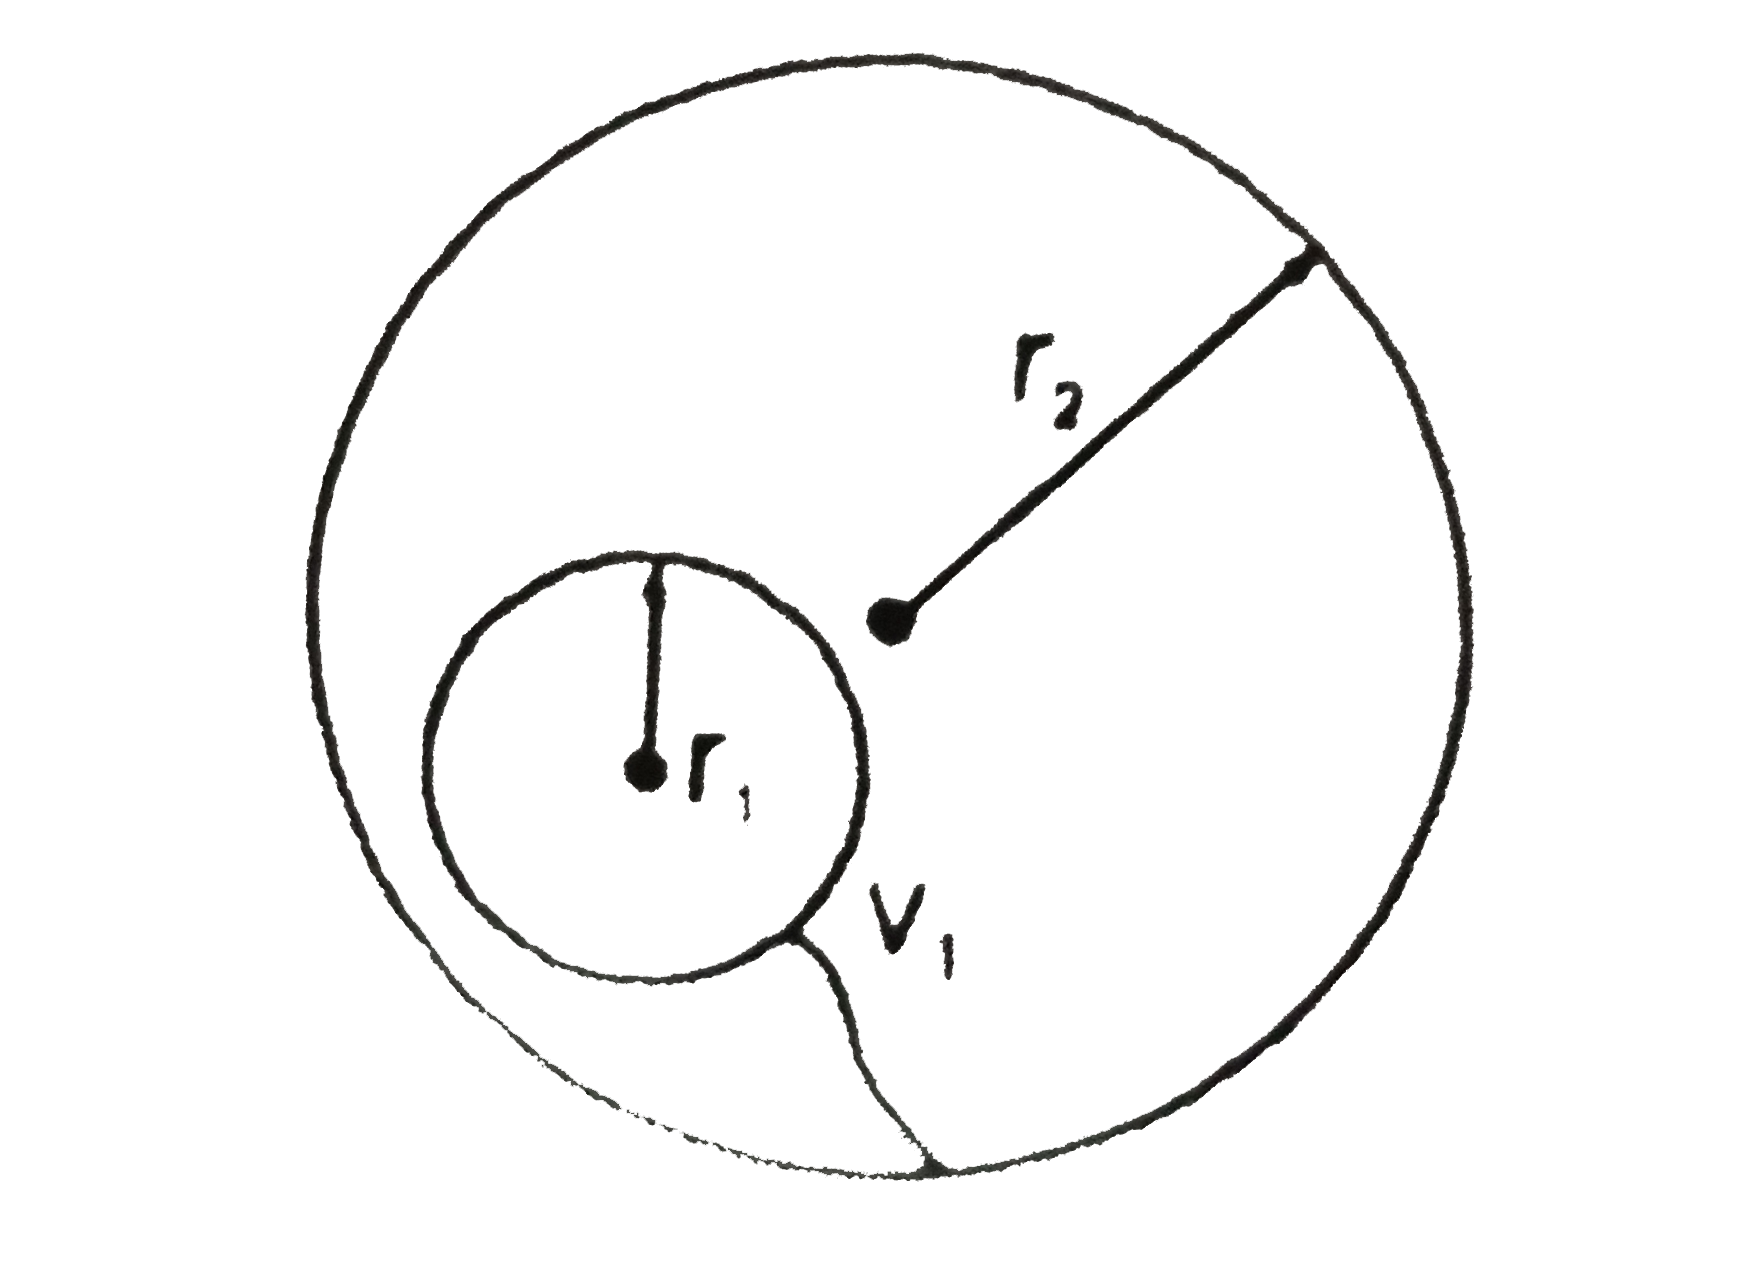 A metal sphere of radius r(1) charges to a potential V(1) is then placed in a thin-walled uncharged conducting spherical shell of radius r(2). Determine the potential acquired by the spherical shell after it has been connected for a short time to the sphere by a conductor.